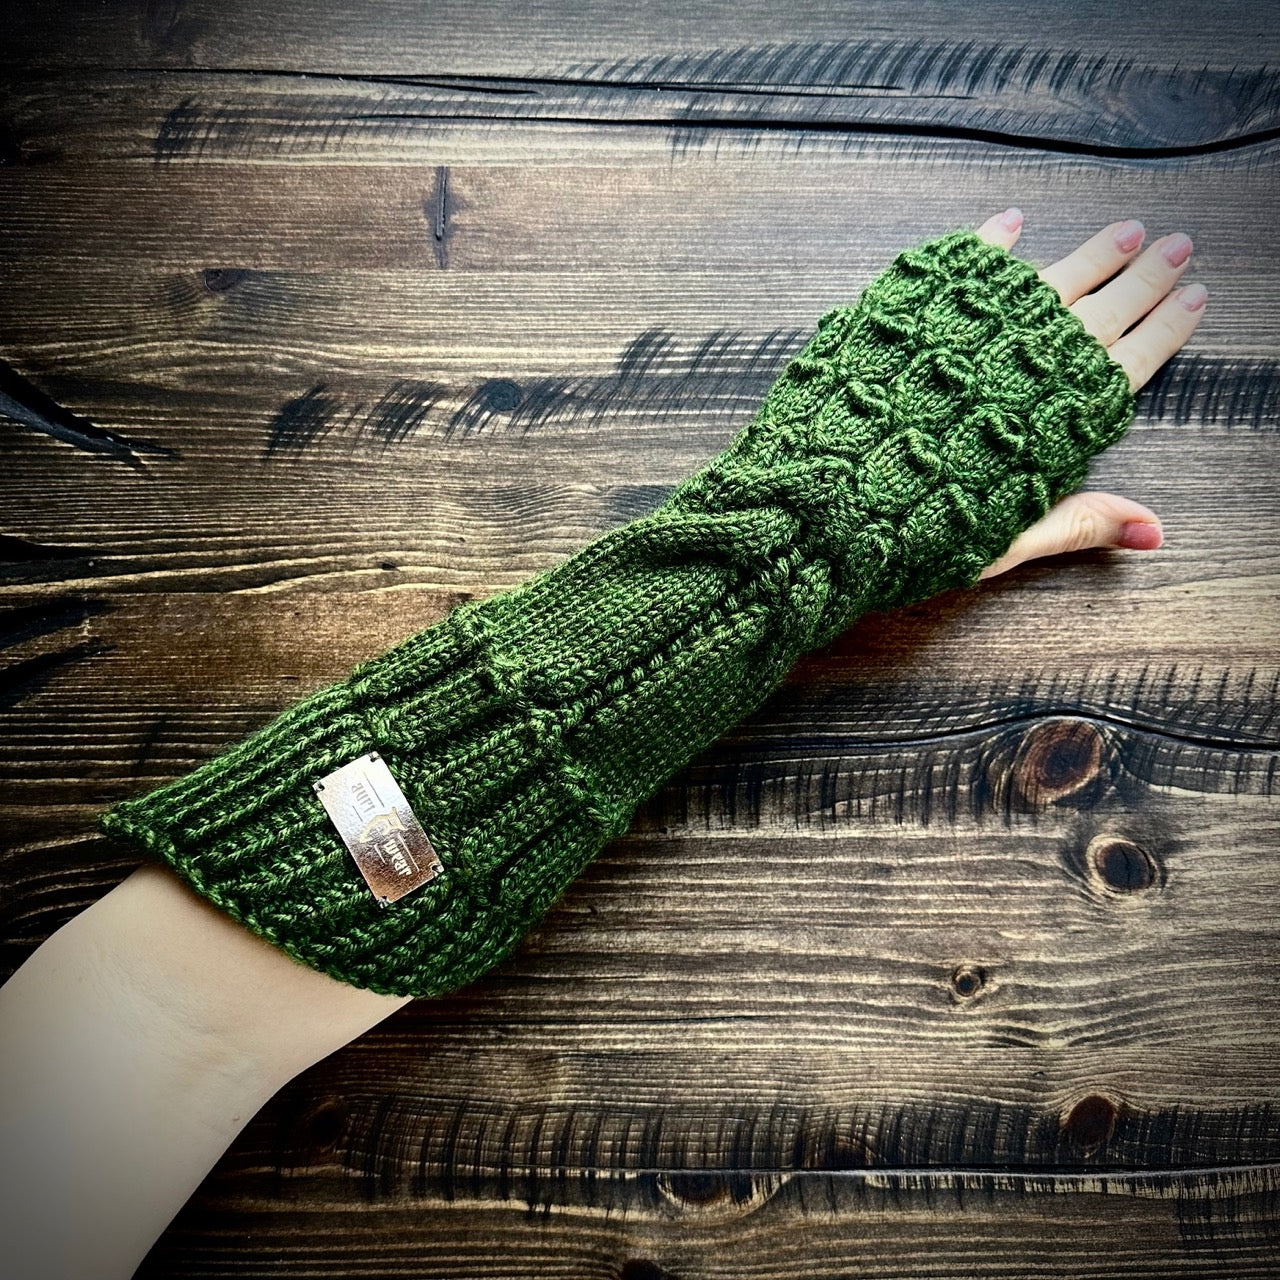 Handmade knitted forest green arm warmers